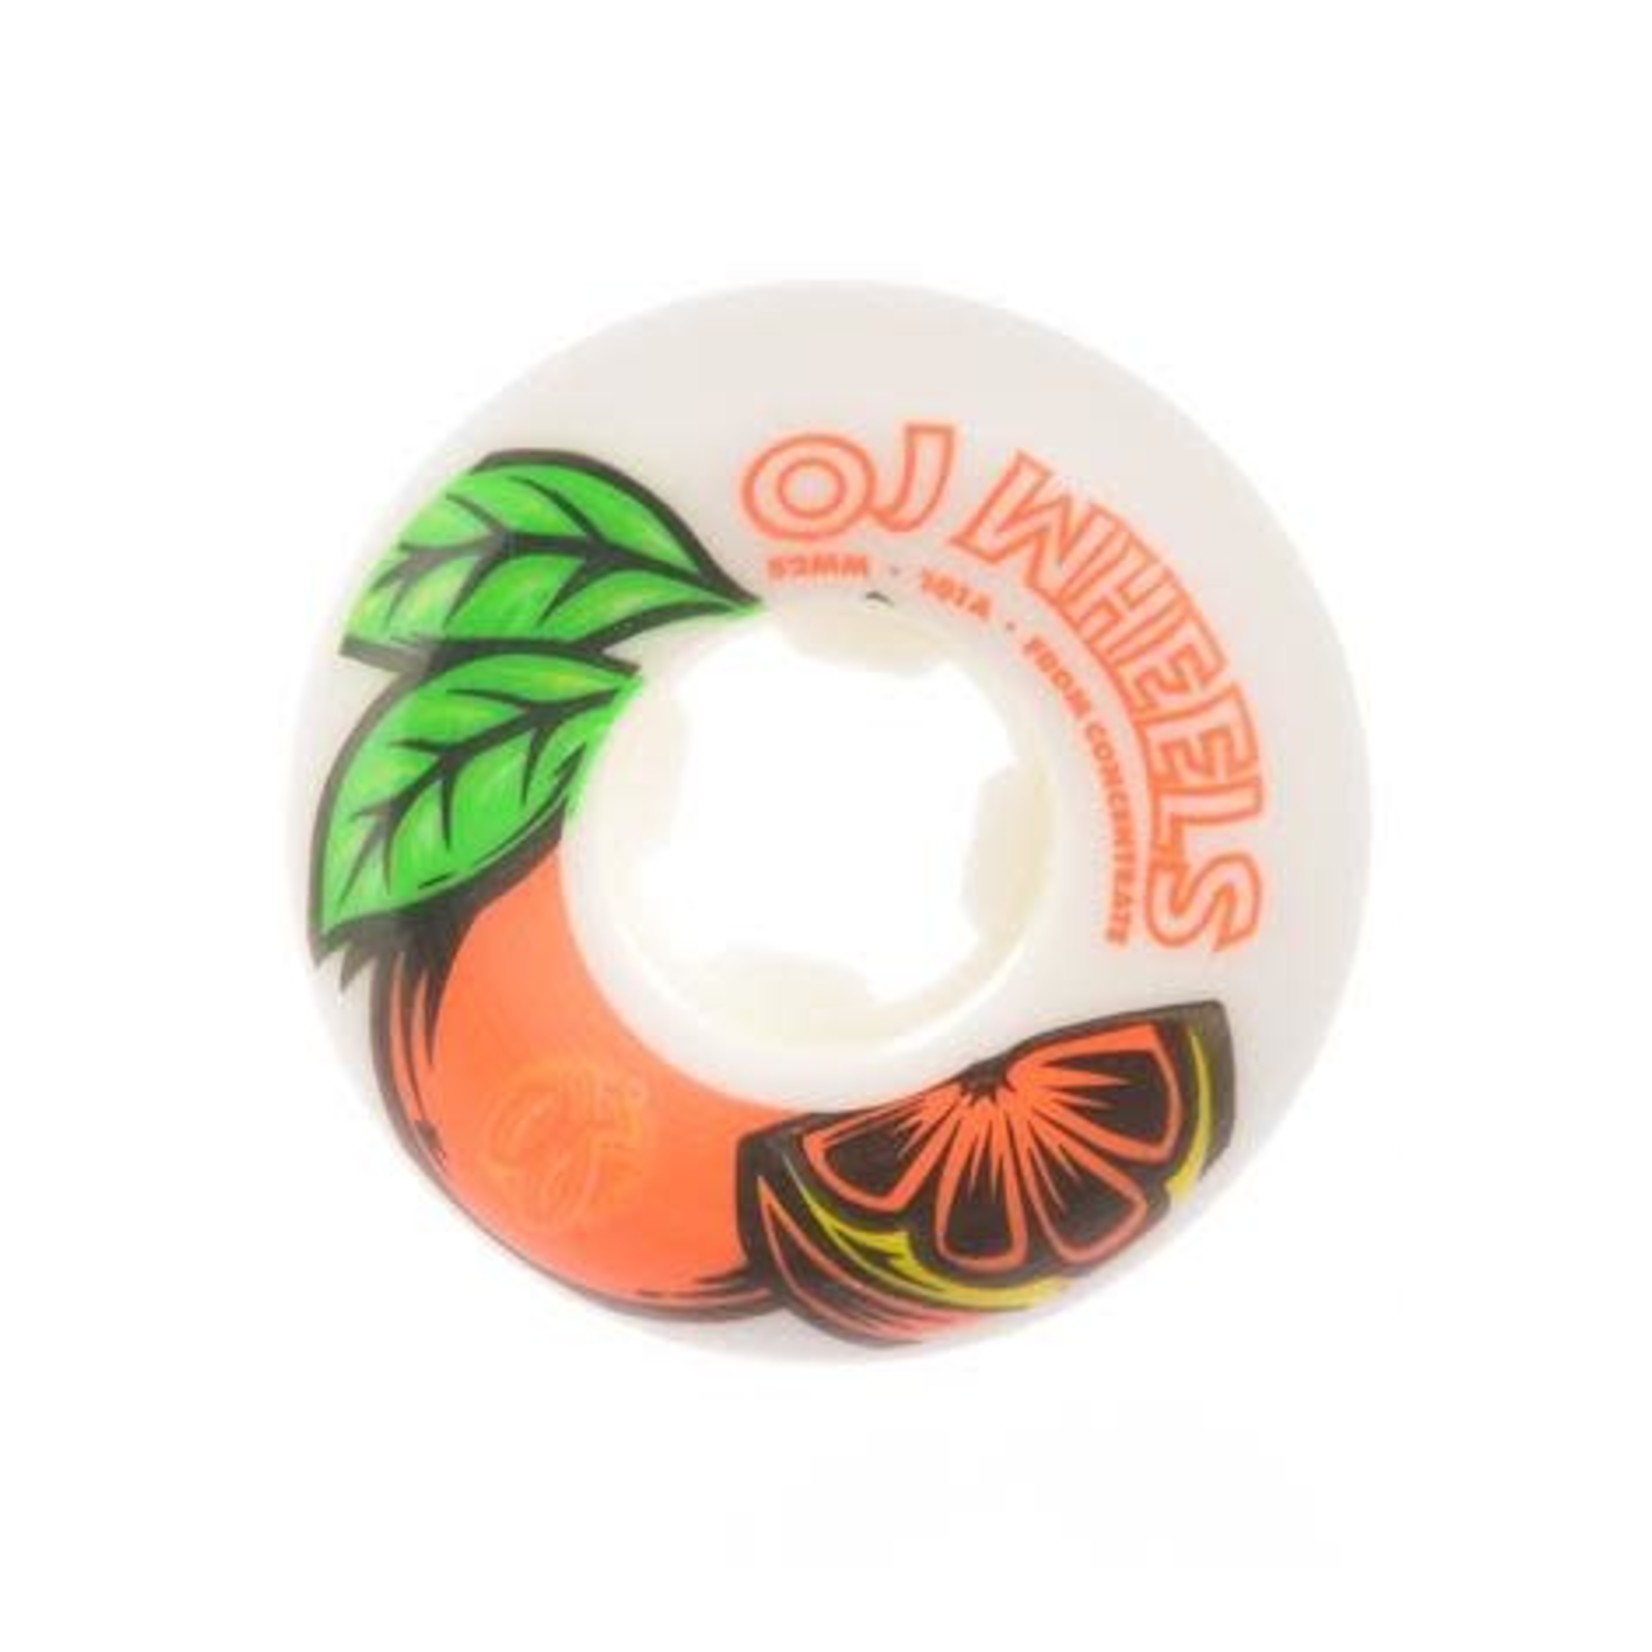 OJ OJ Wheels From Concentrate 2 Hardline 101A 52mm